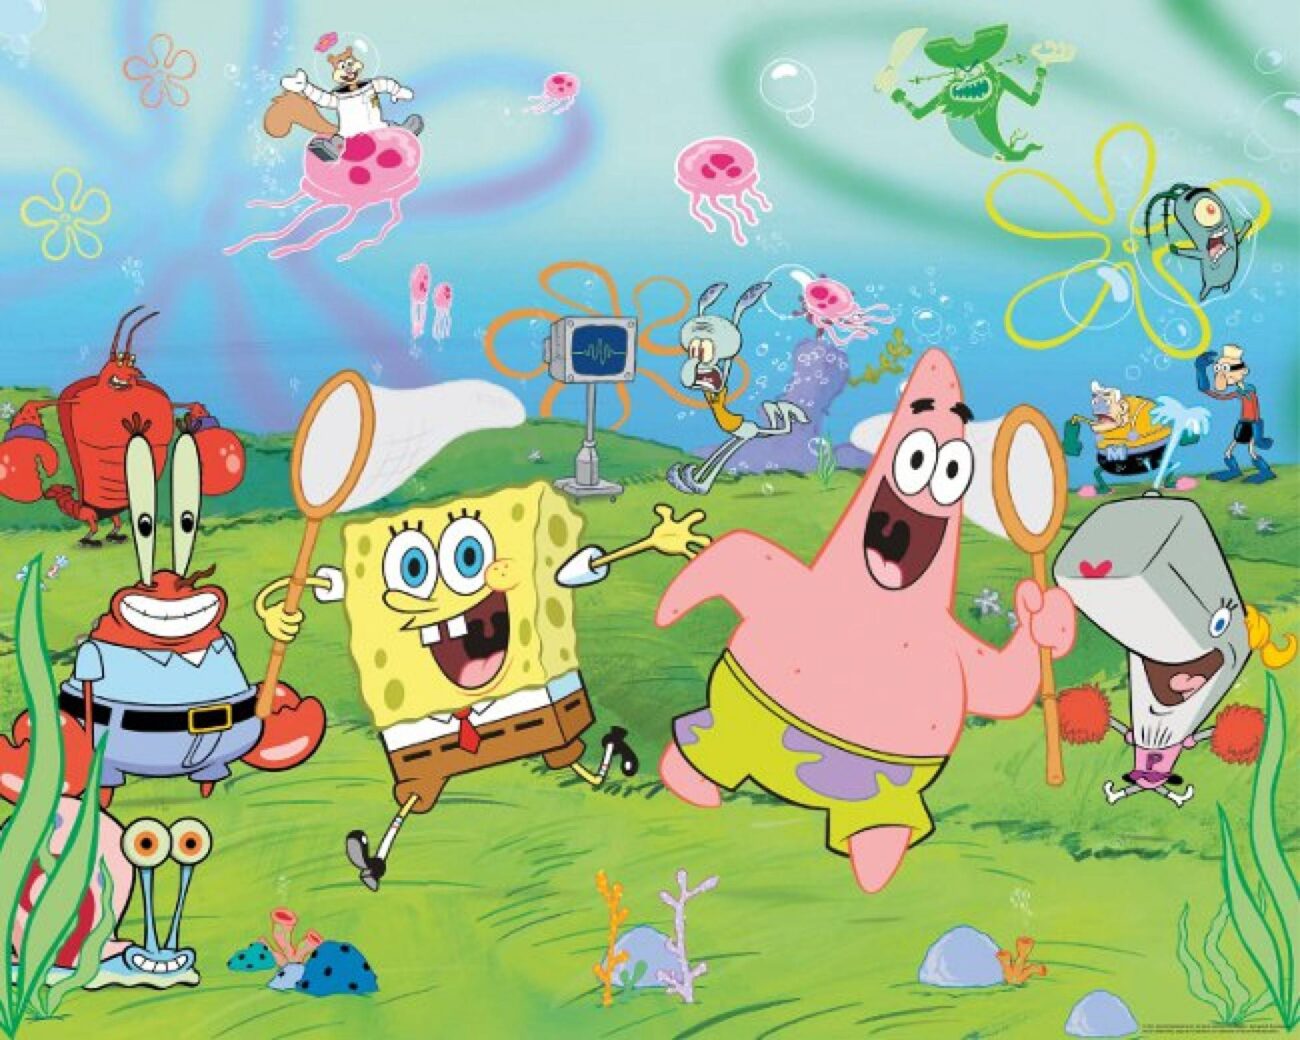 Remember all the classic 'Spongebob Squarepants' songs on the show? If you need a little refresher, check out our list of all the best hits here.